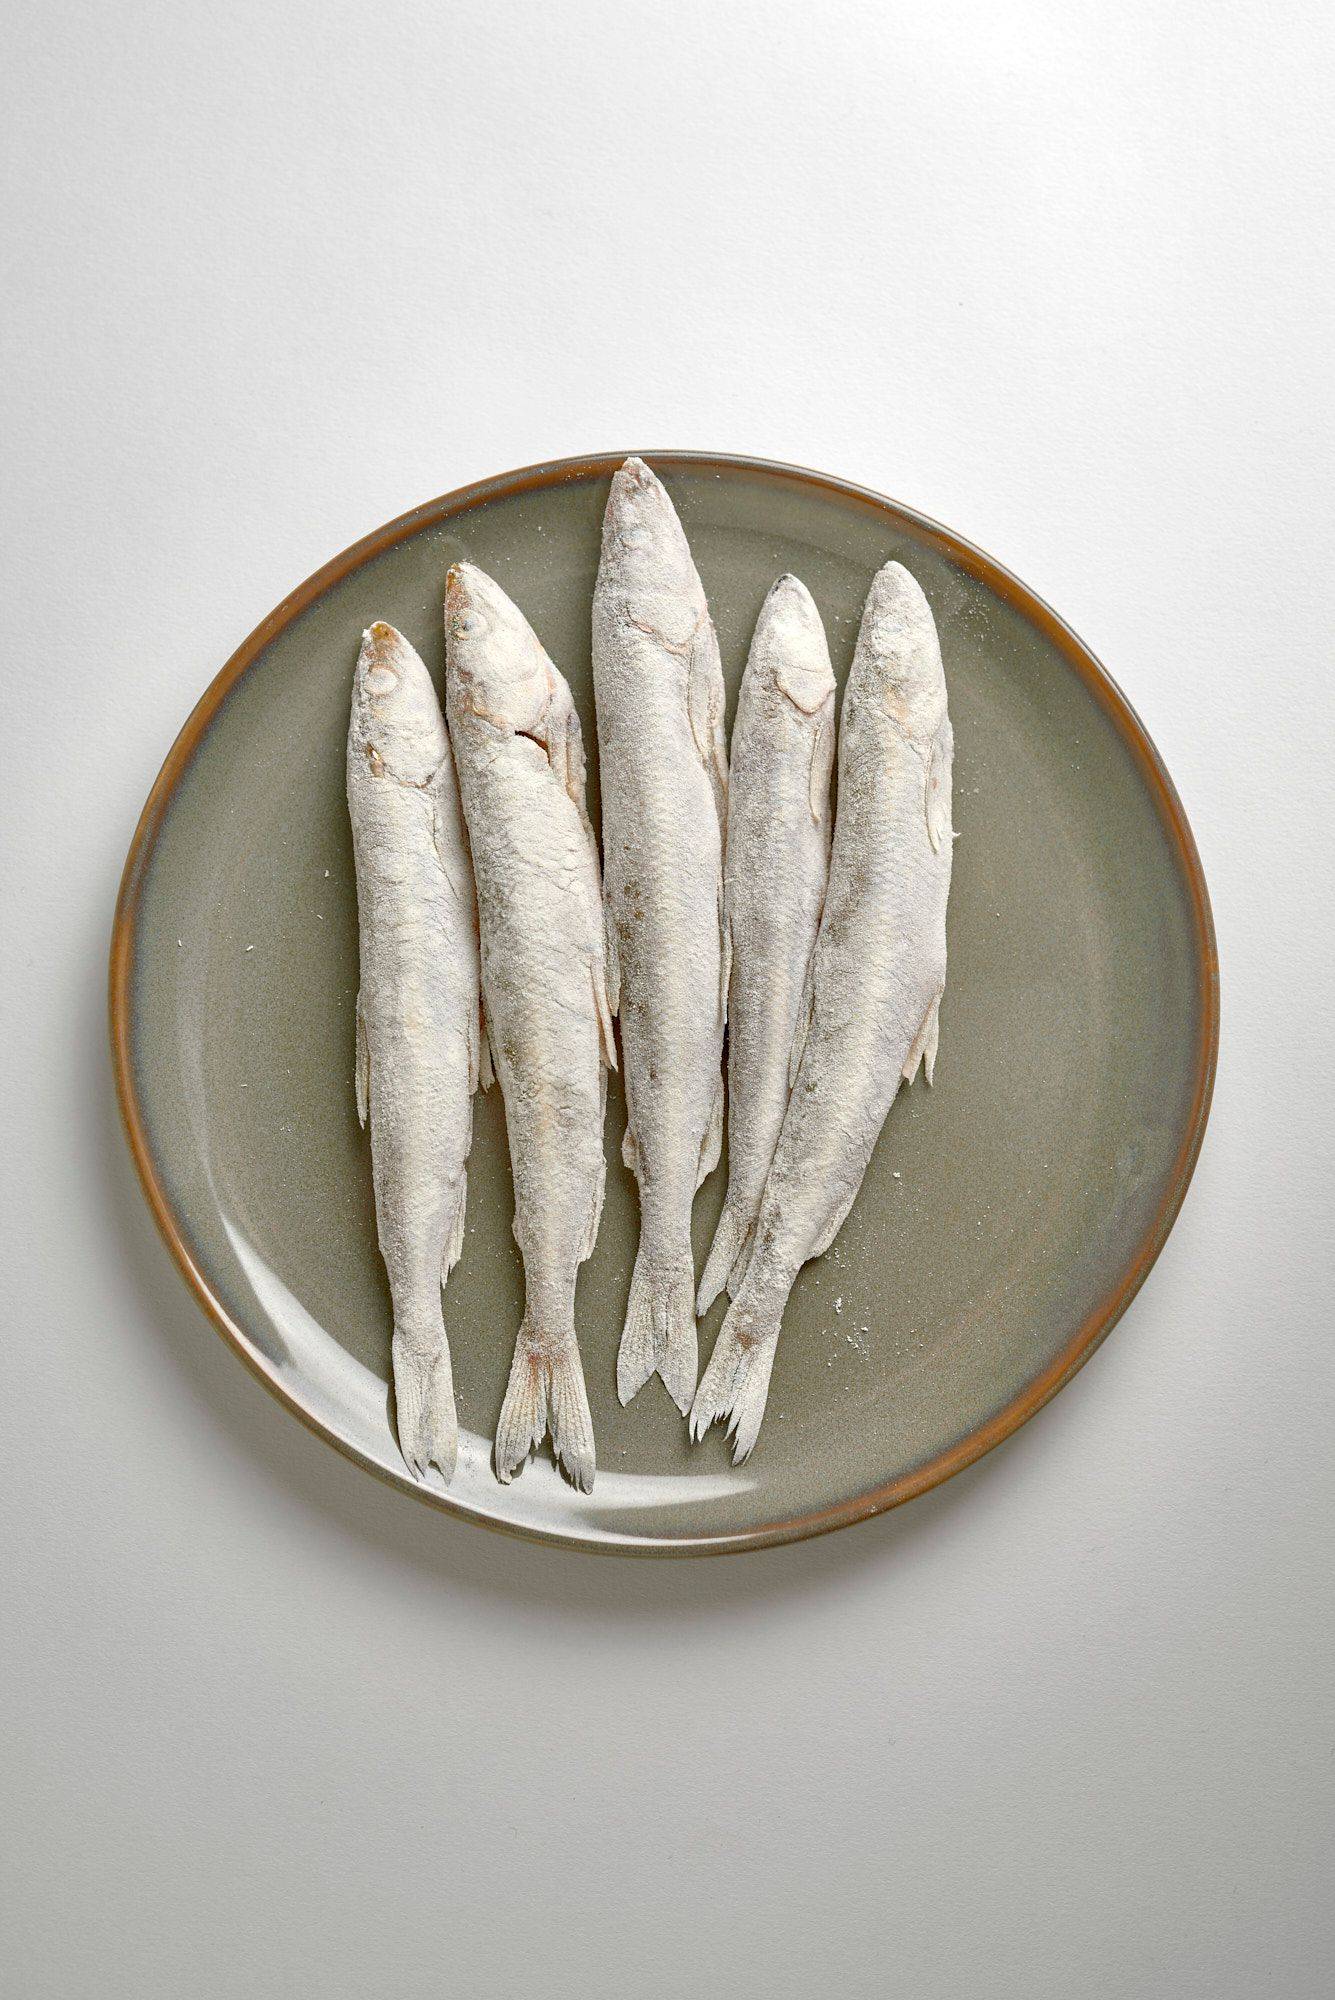 flour tossed smelt fish on a gray plate on white background